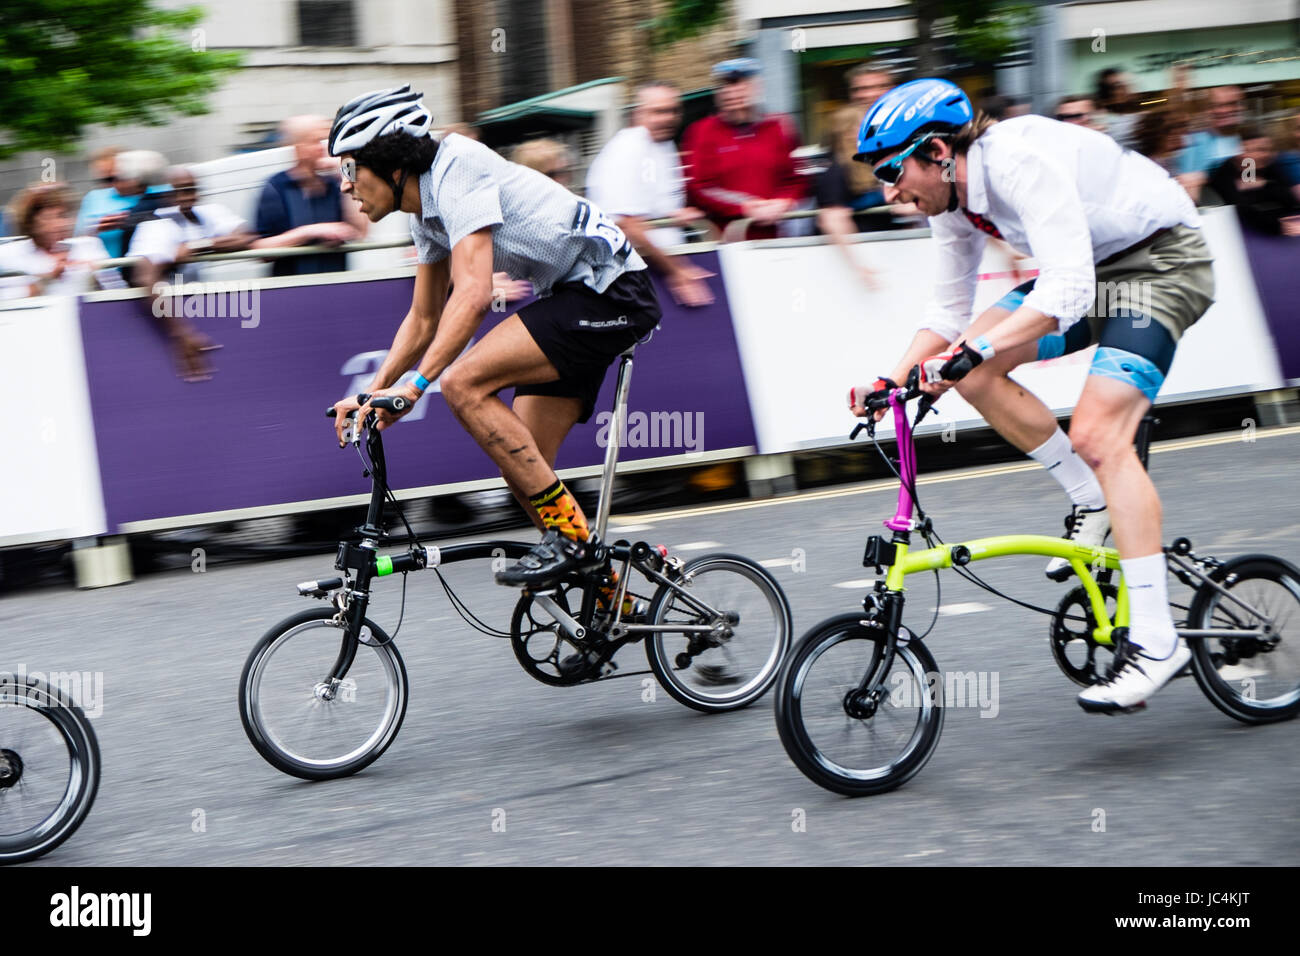 Racing on Brompton bikes at the 2017 London Rahpa Nocturne Criterium Race Stock Photo